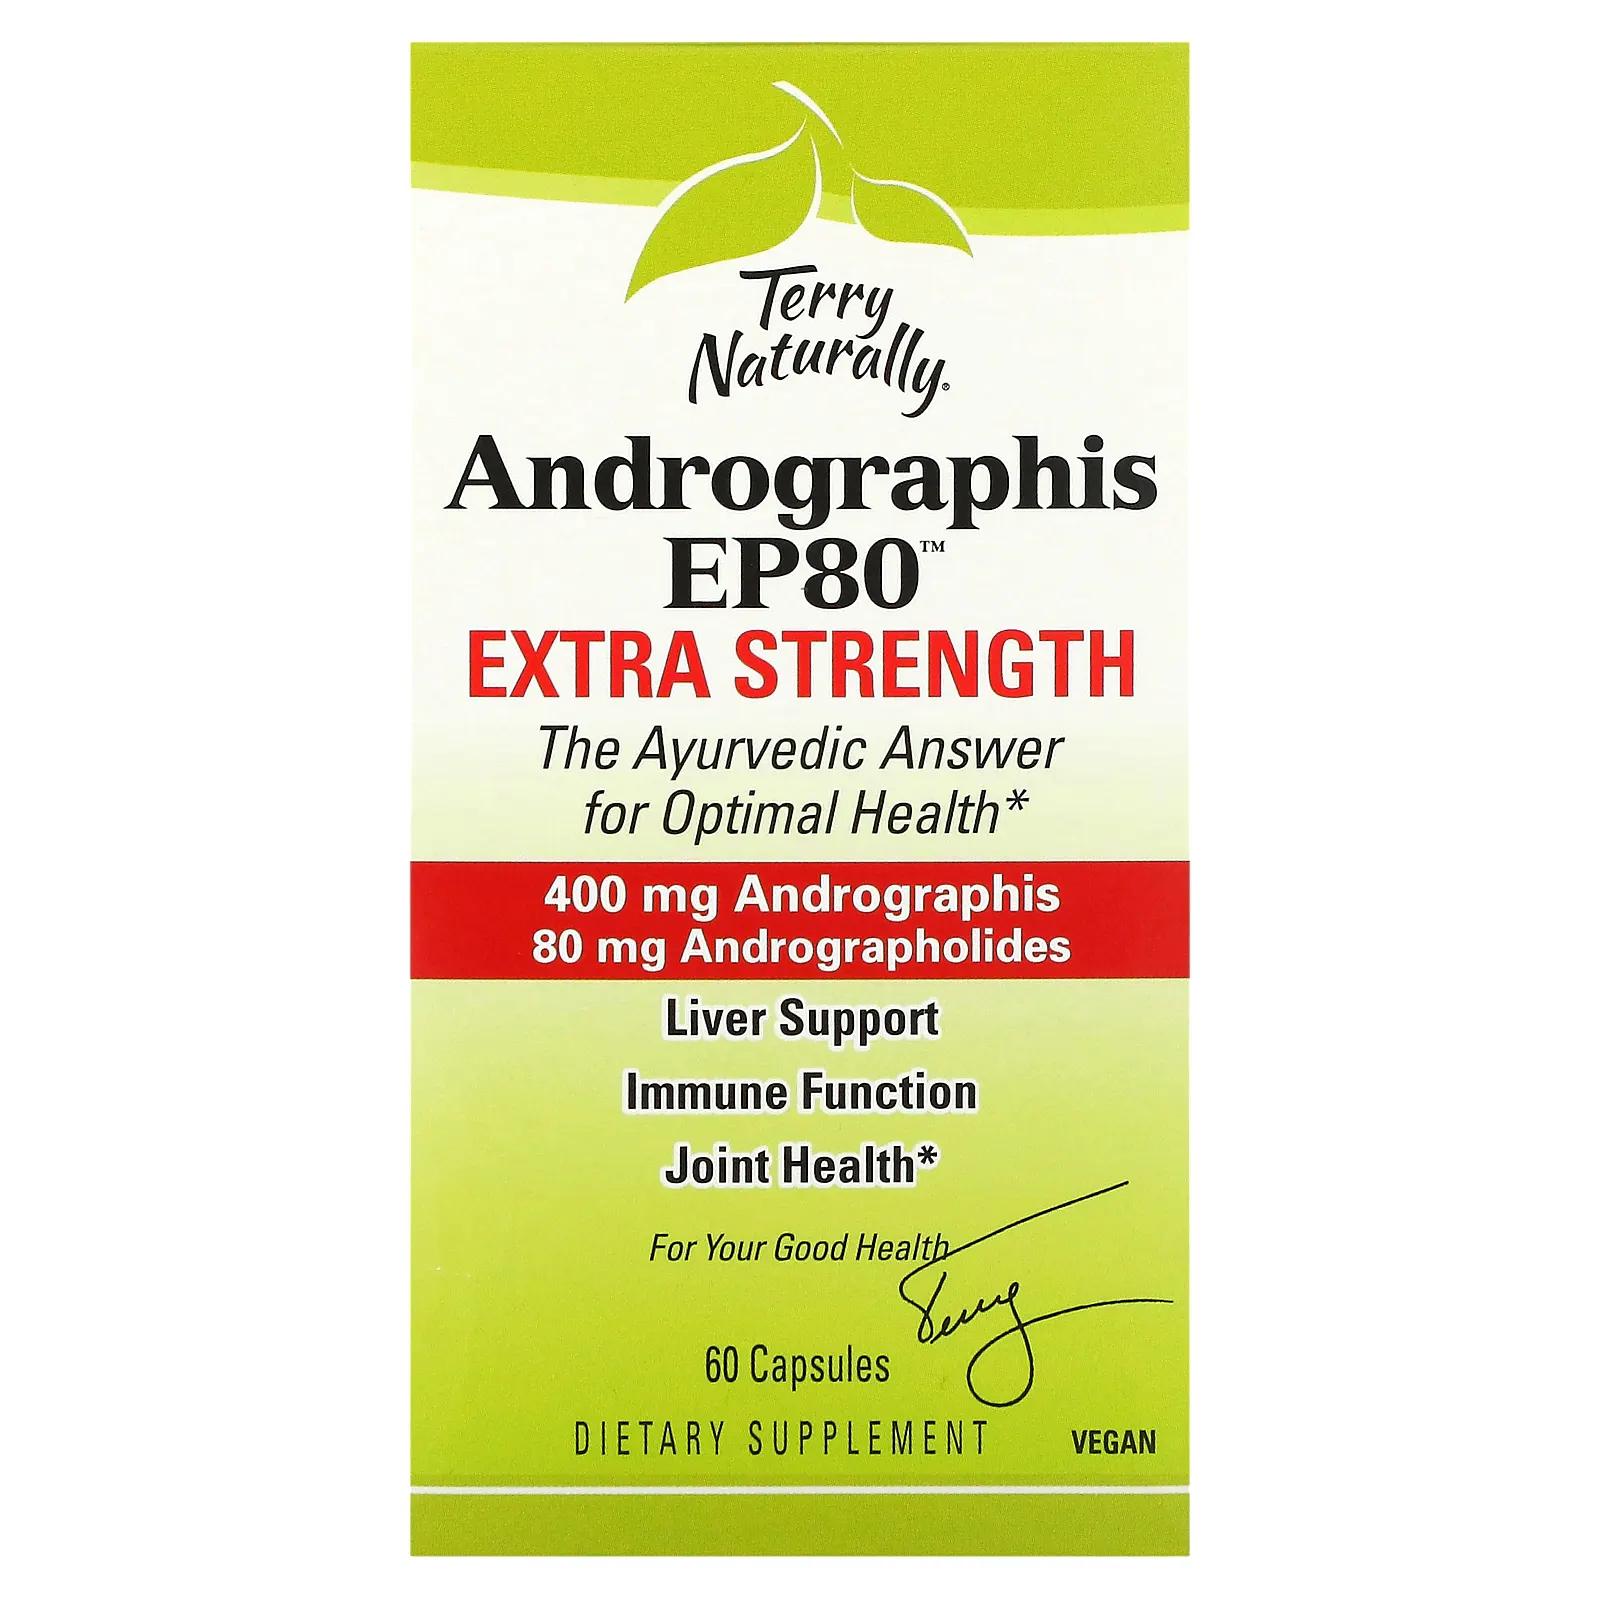 Terry Naturally Andrographis EP80 Extra Strength 60 Capsules terry naturally bosmed 500 advanced boswellia extra strength 60 мягких таблеток